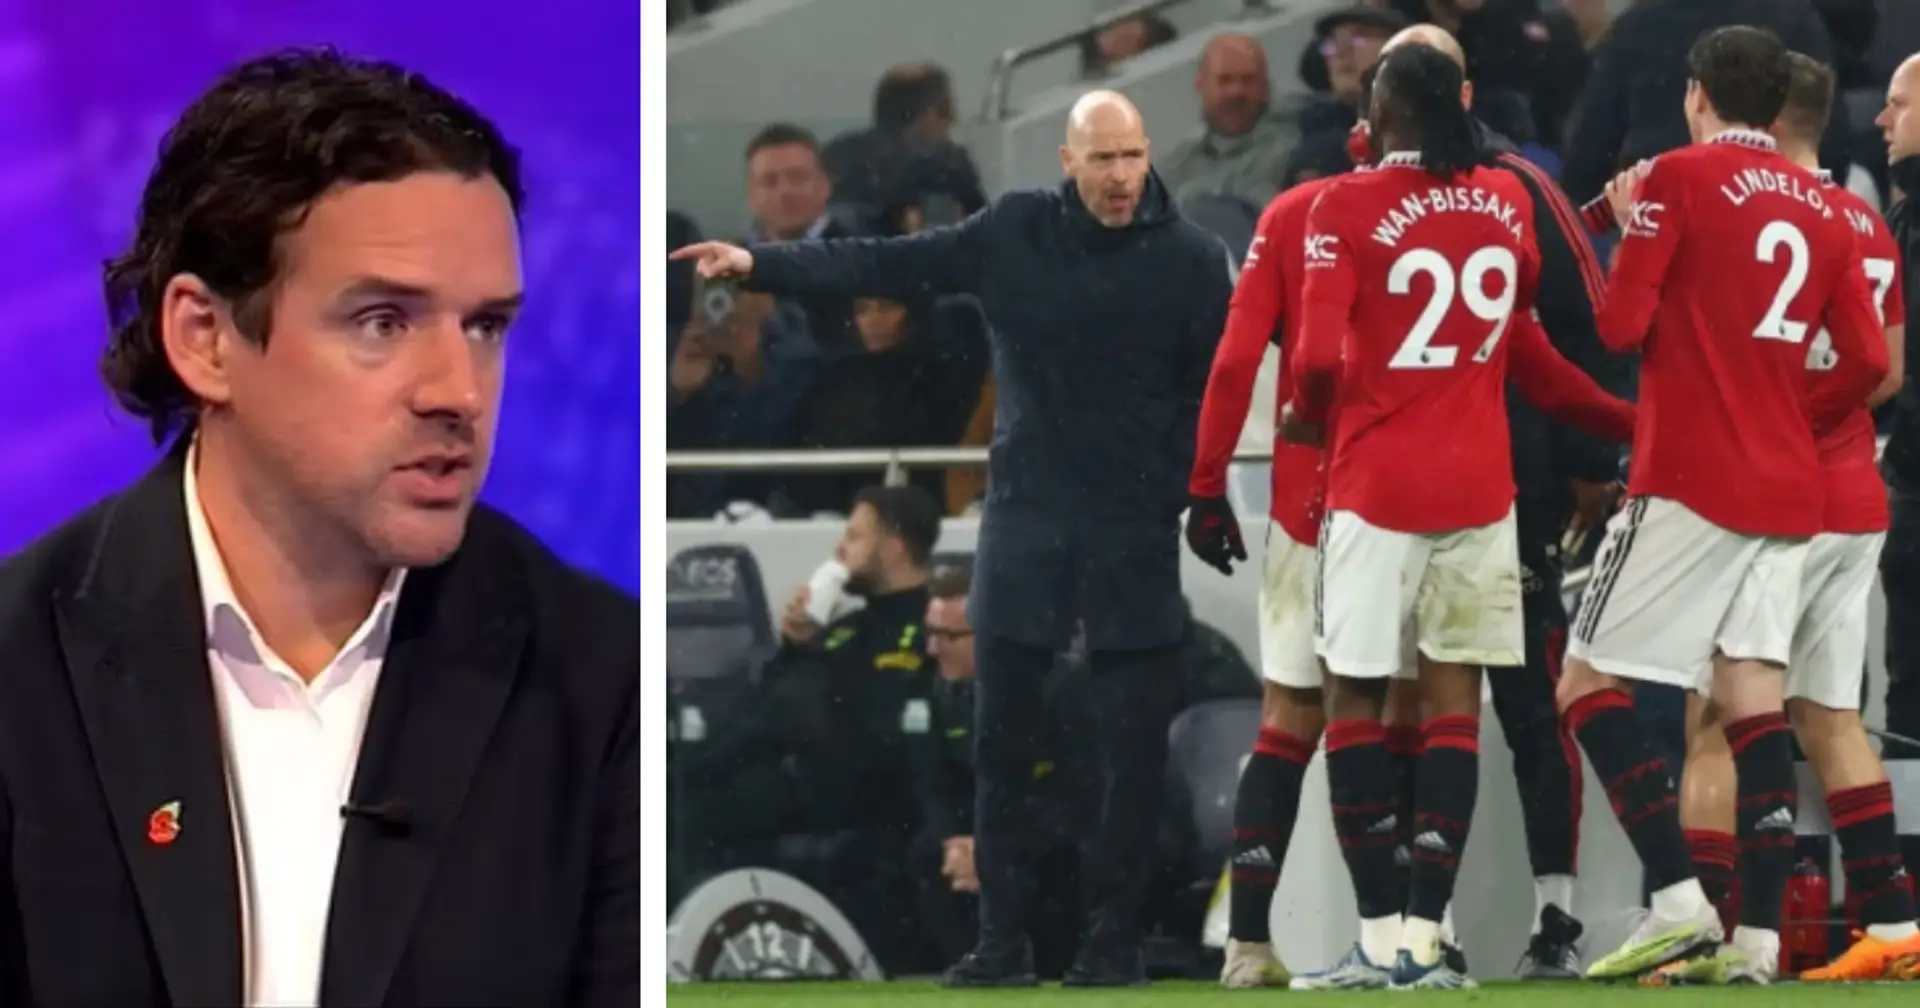 'The subs didn't go his way': Owen Hargreaves questions Erik ten Hag's decision-making vs Spurs